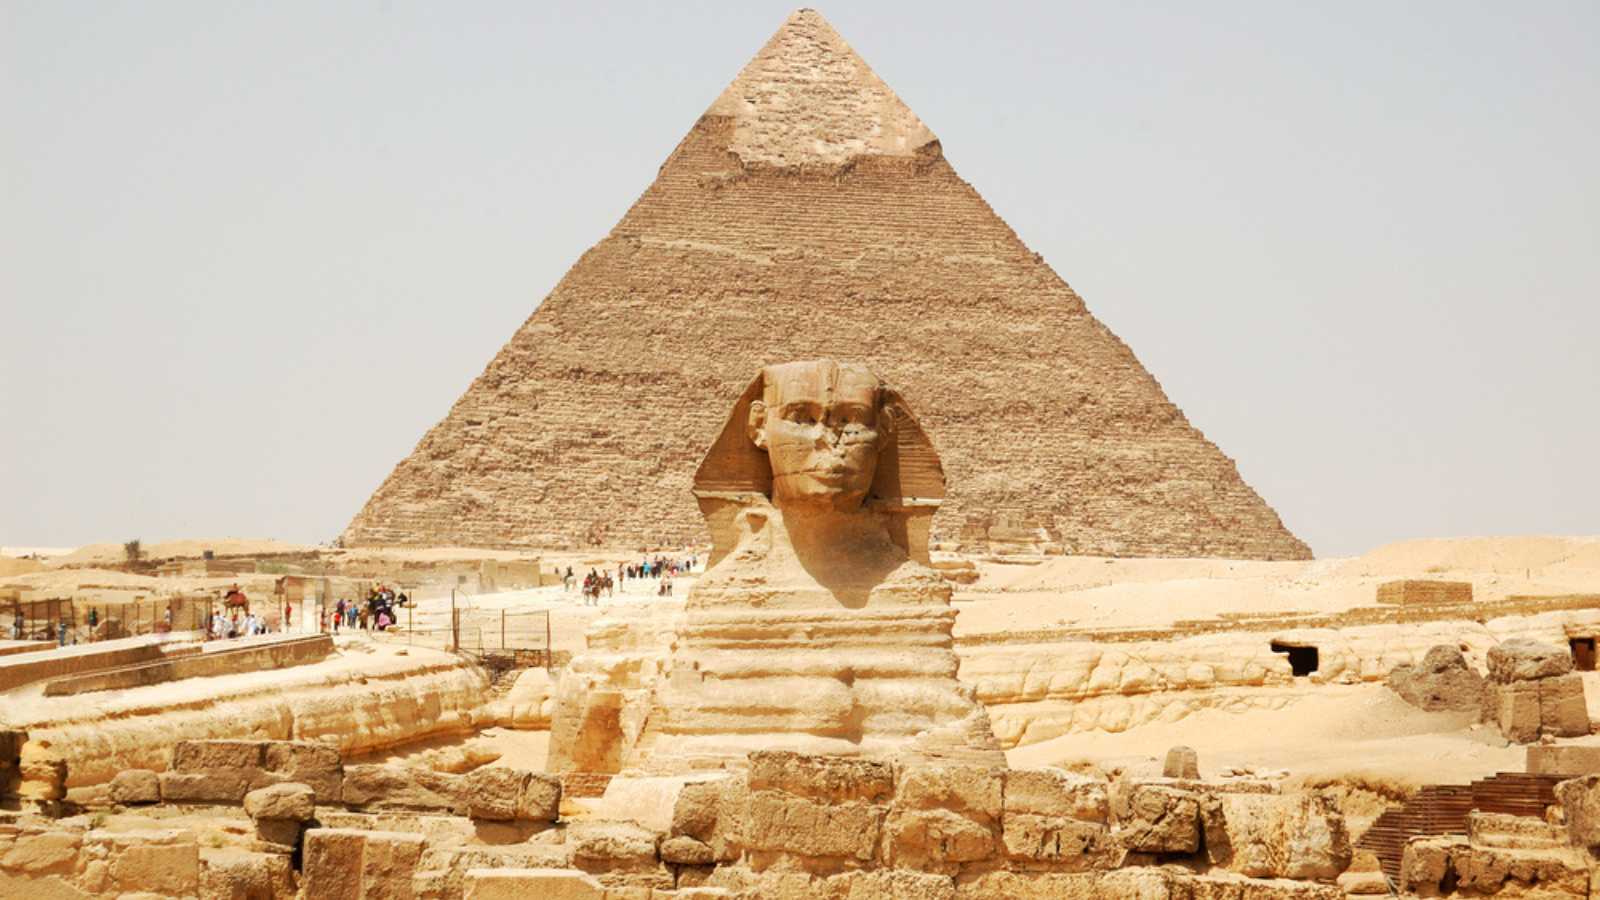 <p>If the pyramids, the Nile, and the Great Sphinx appeal to your senses, add Egypt to your list. Visiting the Grand Egyptian Museum is a must for museum-loving travelers. It has over 20,000 artifacts on display, including over 5,000 from Pharaoh Tutankhamun’s tomb. There are planned group trips available that take care of transfers, meals, entry tickets, and other arrangements so you can relax and enjoy your visit to Egypt.</p>